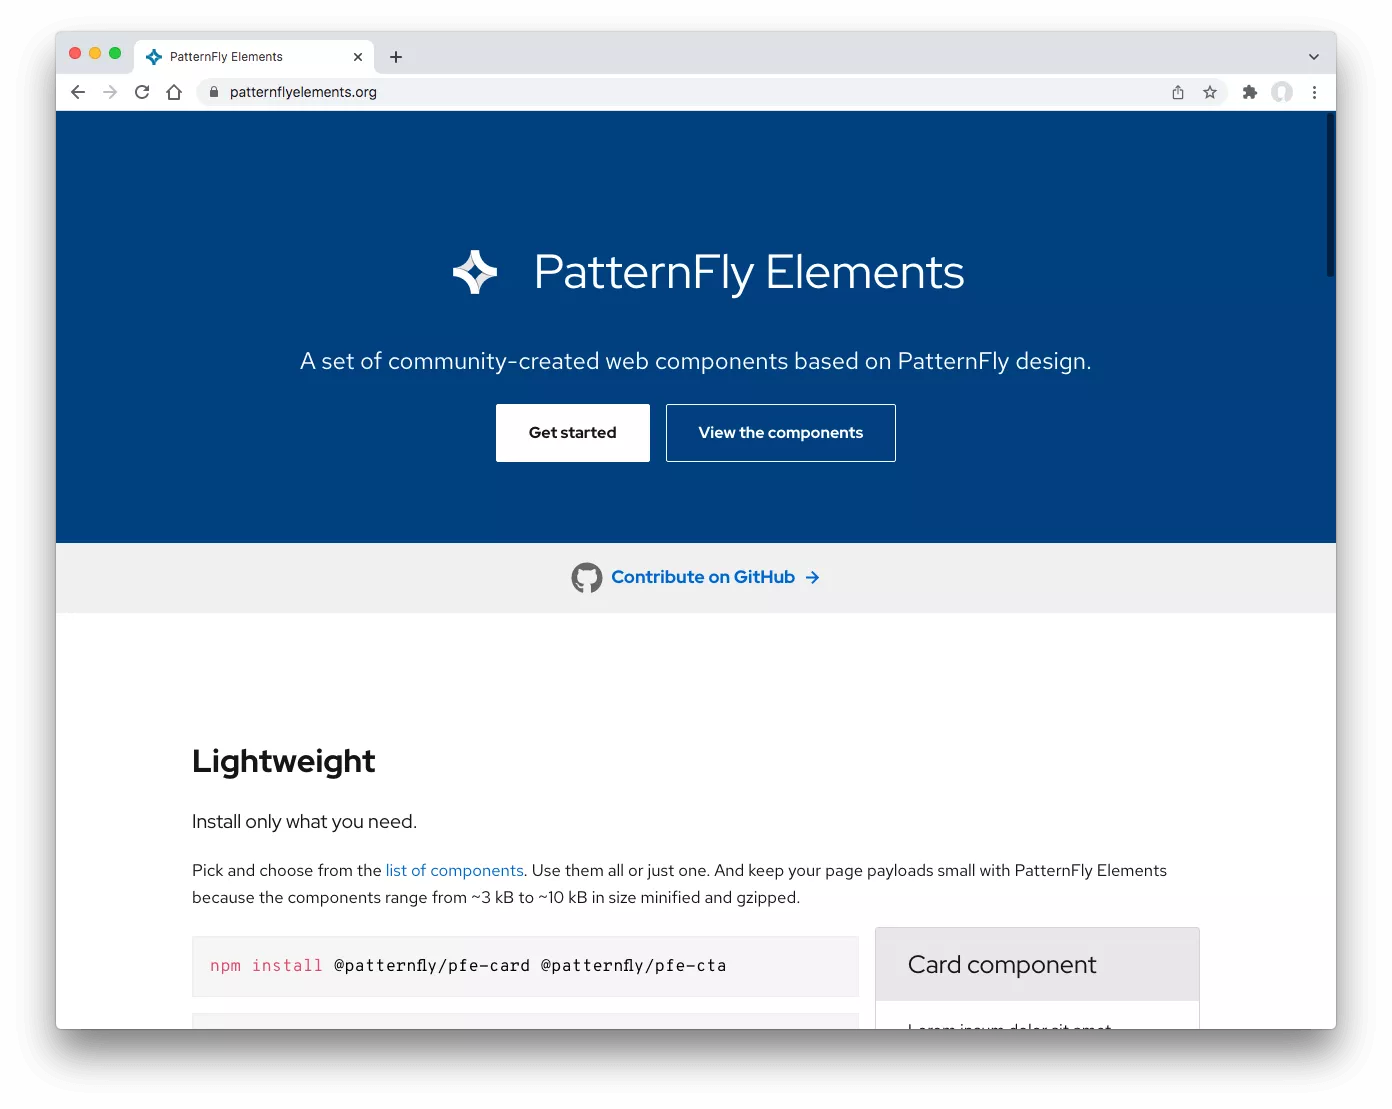 Screenshot of the PatternFly Elements homepage